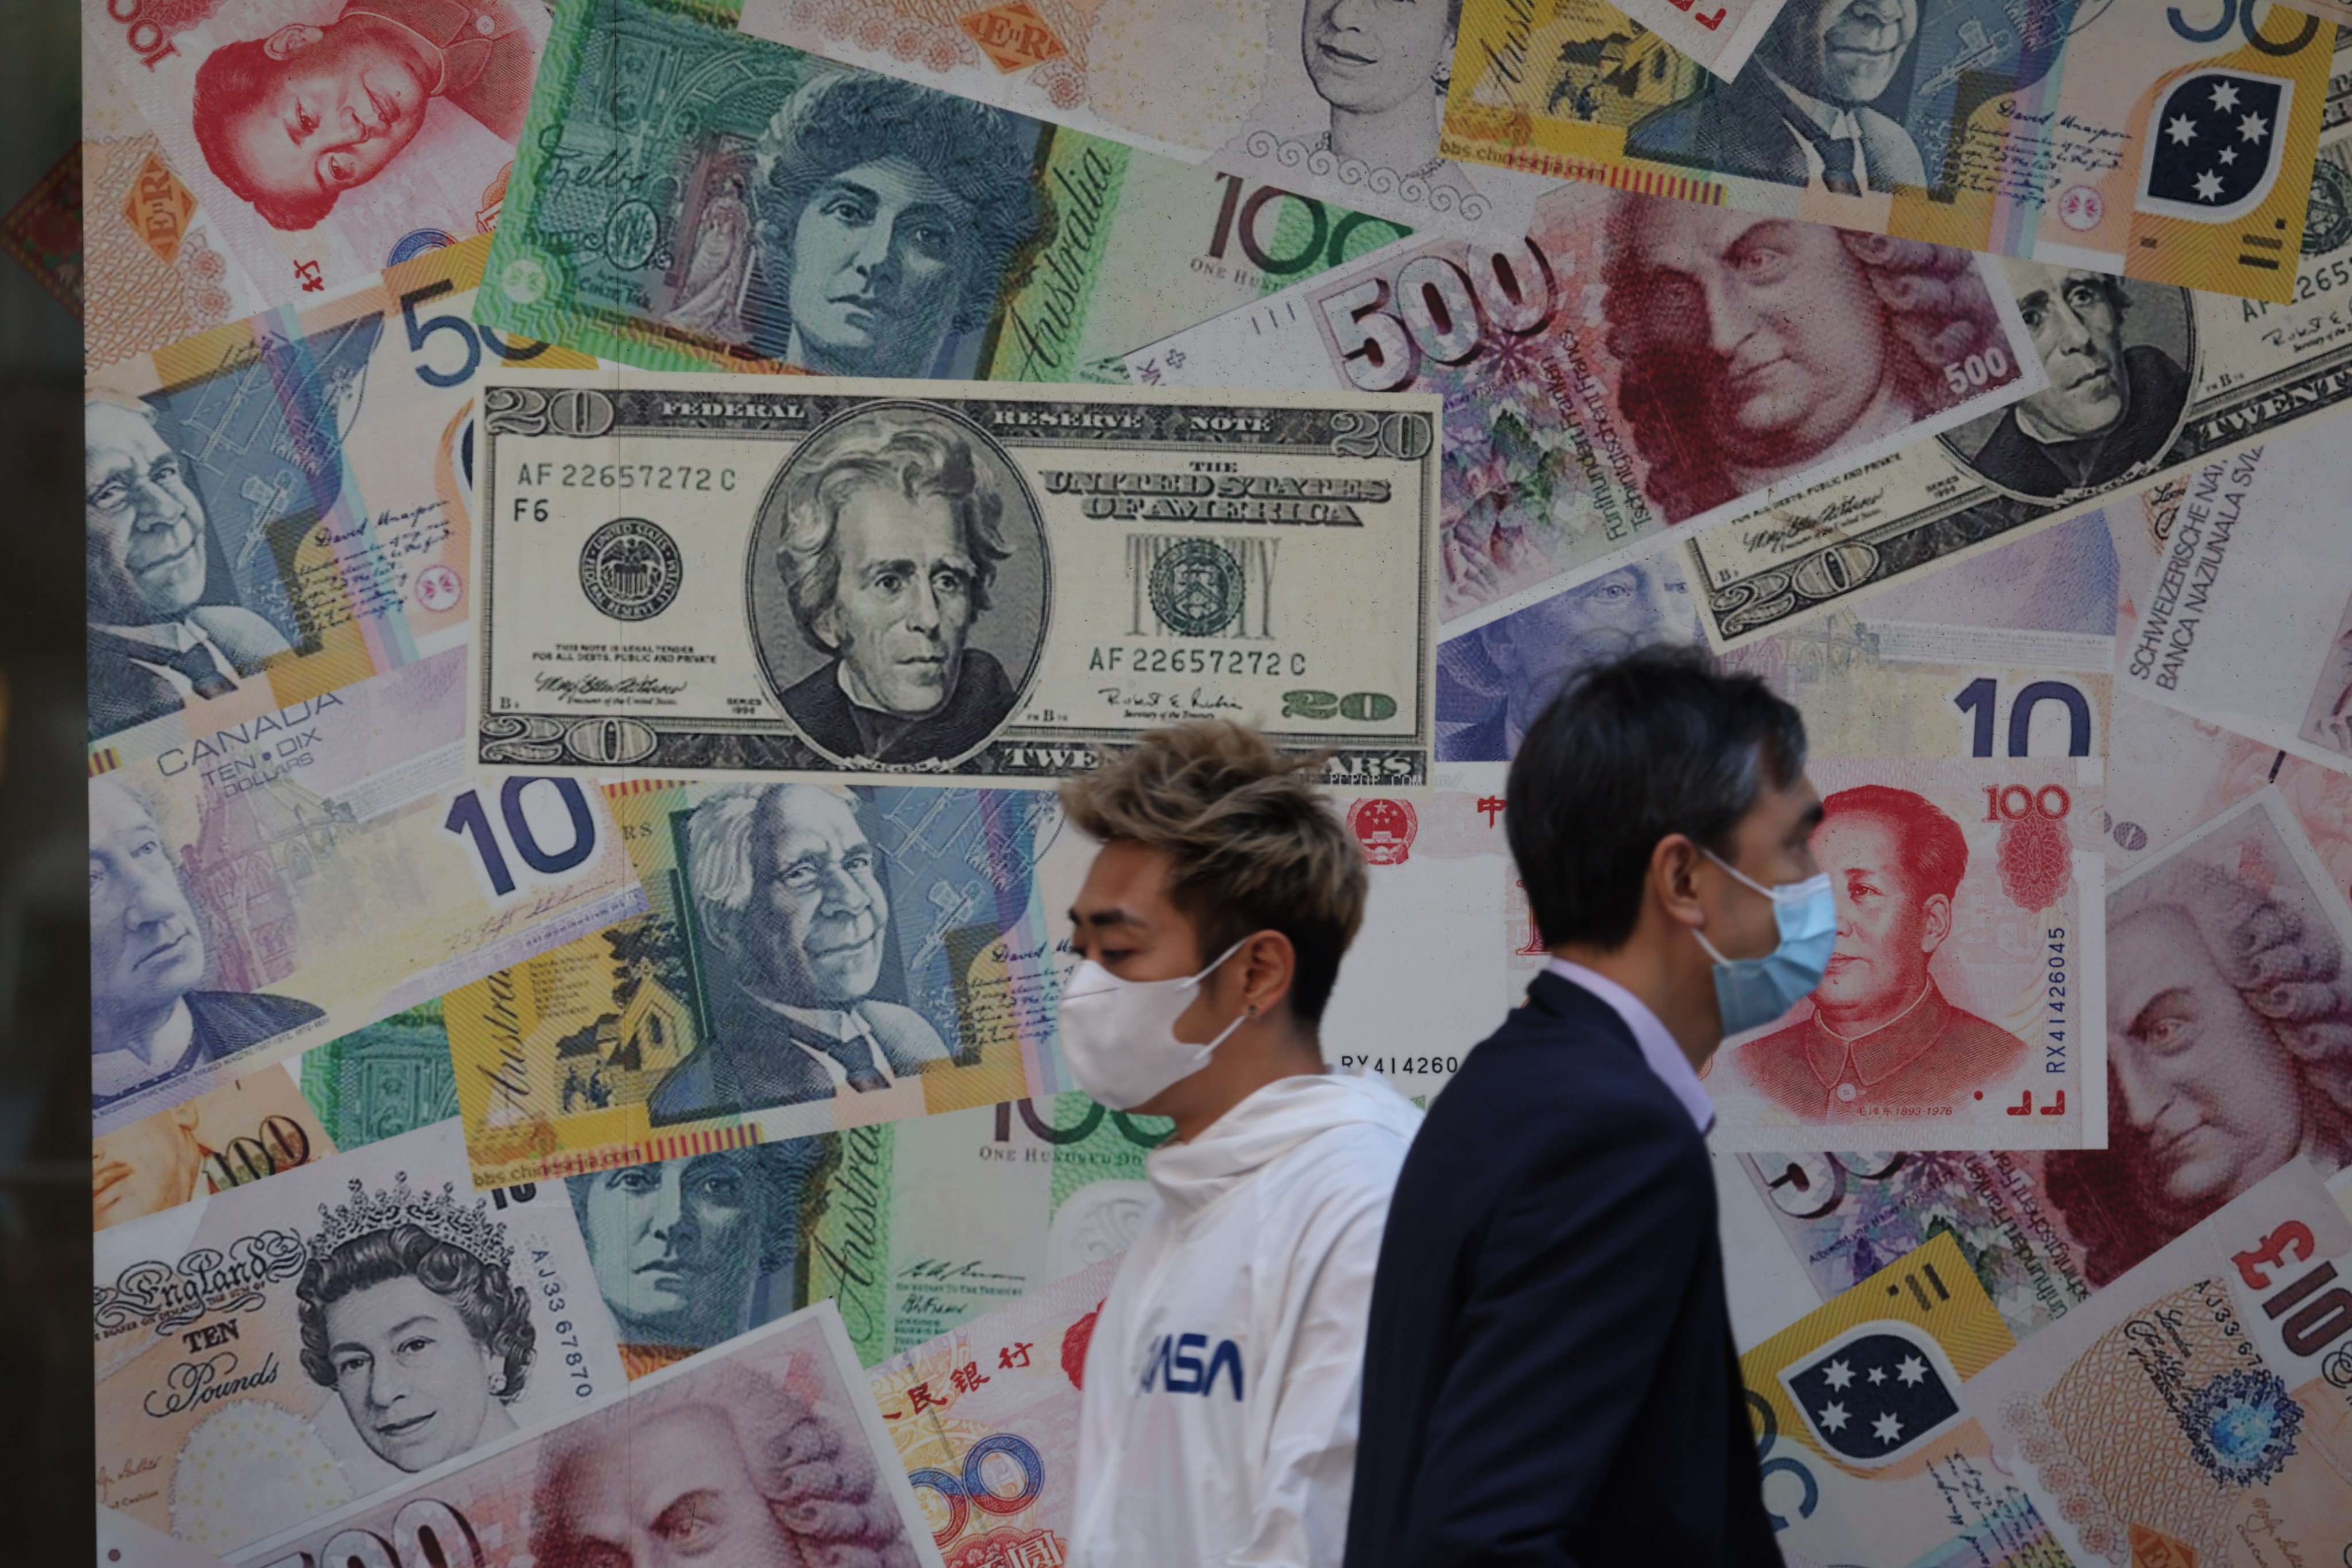 People walk past currency notes displayed outside a currency exchange in Sheung Wan, Hong Kong, in October last year. China’s renminbi could be a clear candidate for investors looking for attractive short dollar currency plays. Photo: Yik Yeung-man